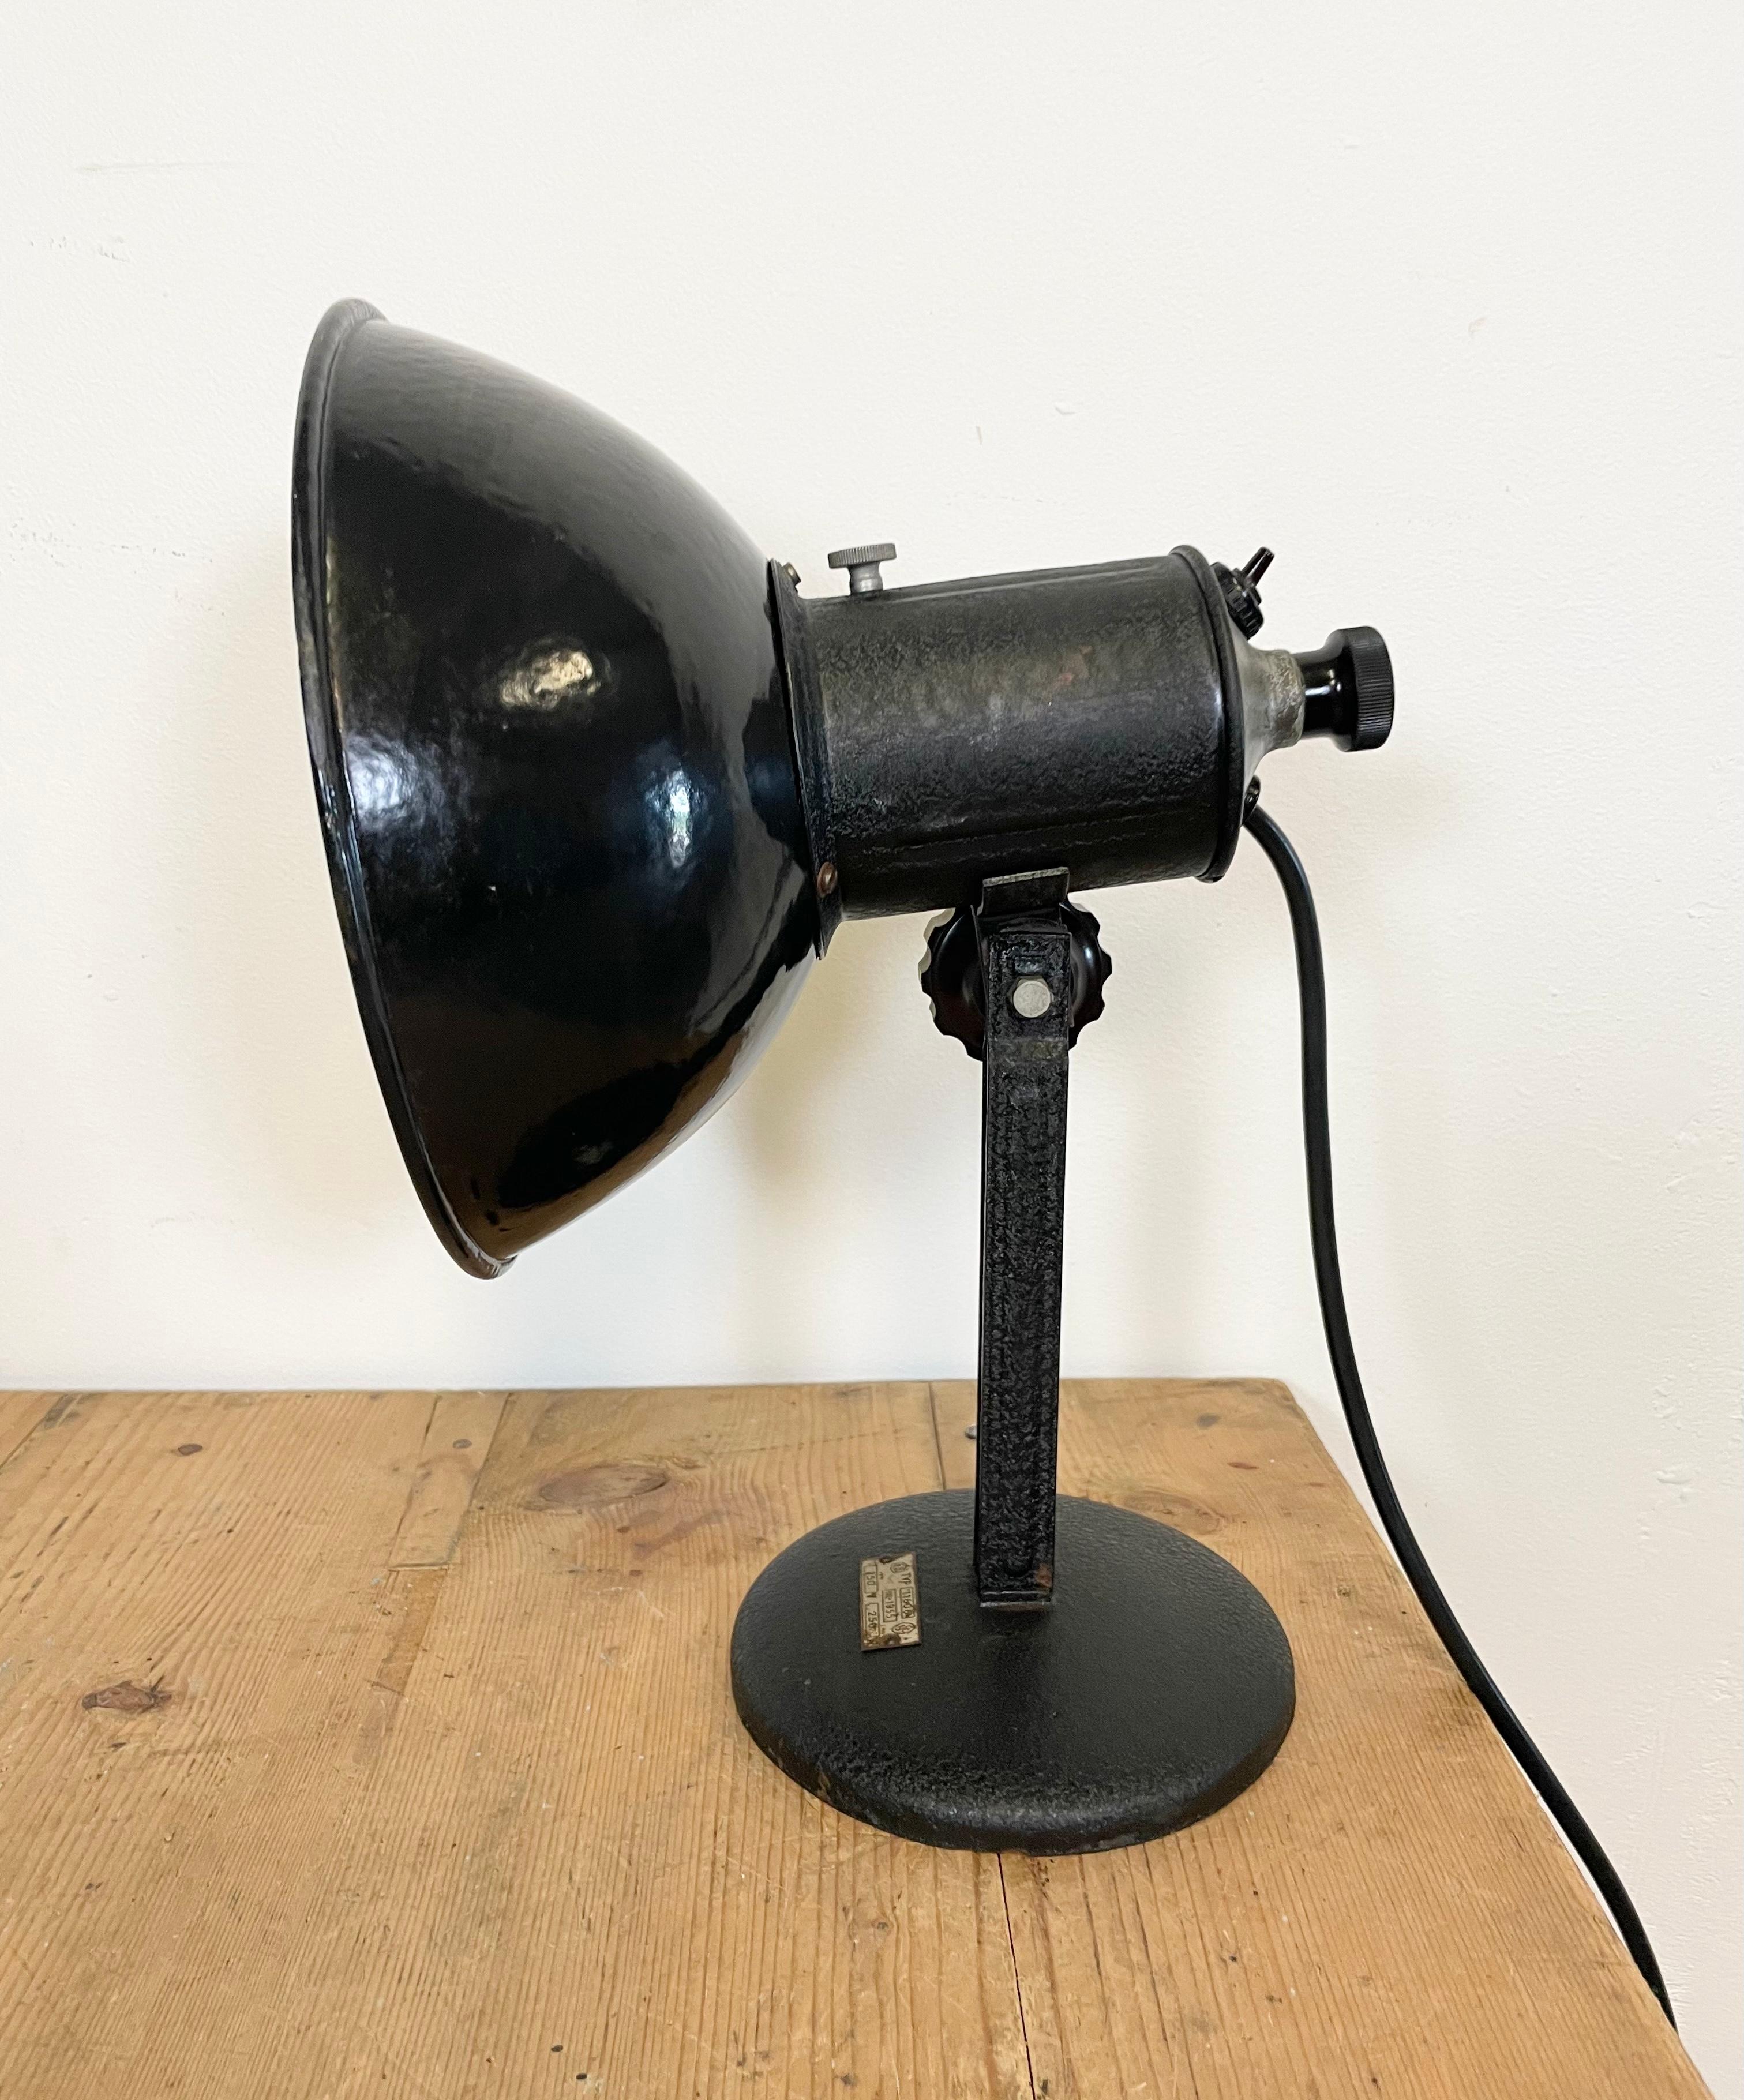 Industrial adjustable table lamp from former Czechoslovakia made during the 1950s. It features a black enamel shade with white enamel interior an iron base. Porcelain socket for E 27 lightbulbs, new wire. Very good vintage condition. Fully